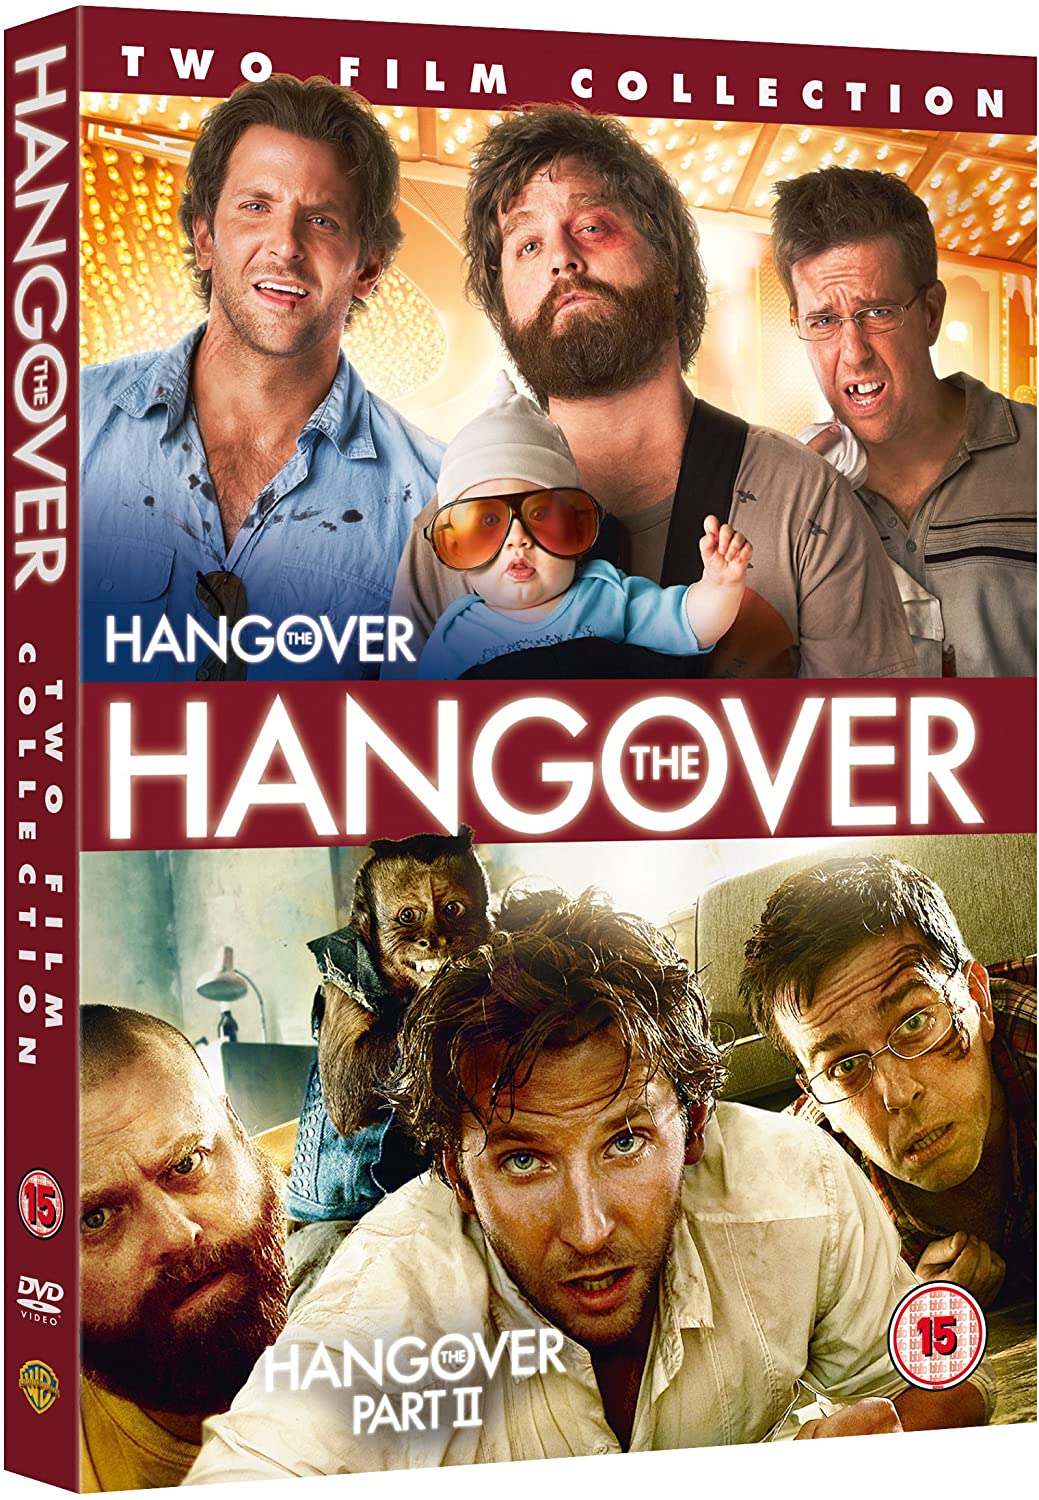 The Hangover - Parts I and II [2017] -  Comedy [DVD]